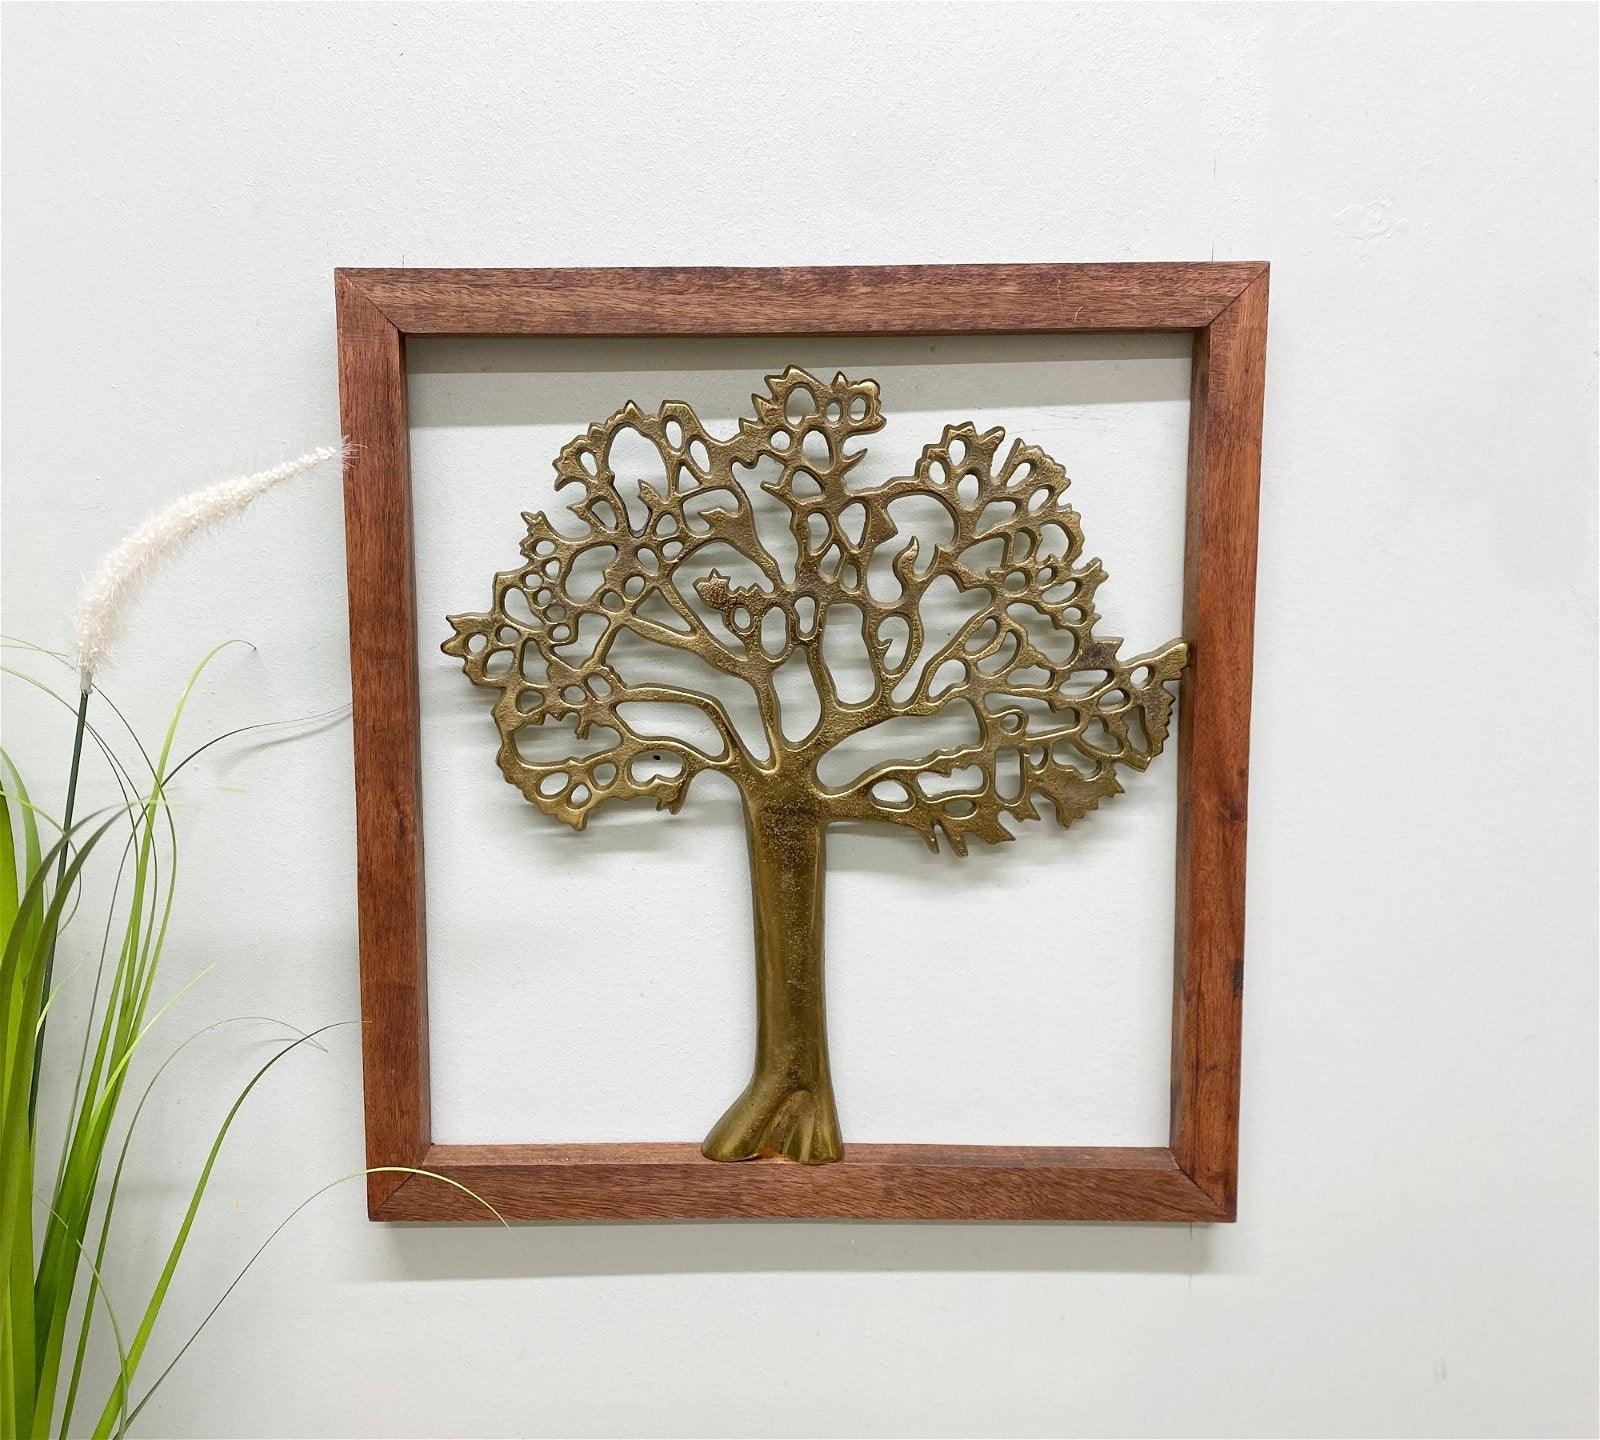 Brass Tree Of Life In Wooden Frame - £42.99 - 